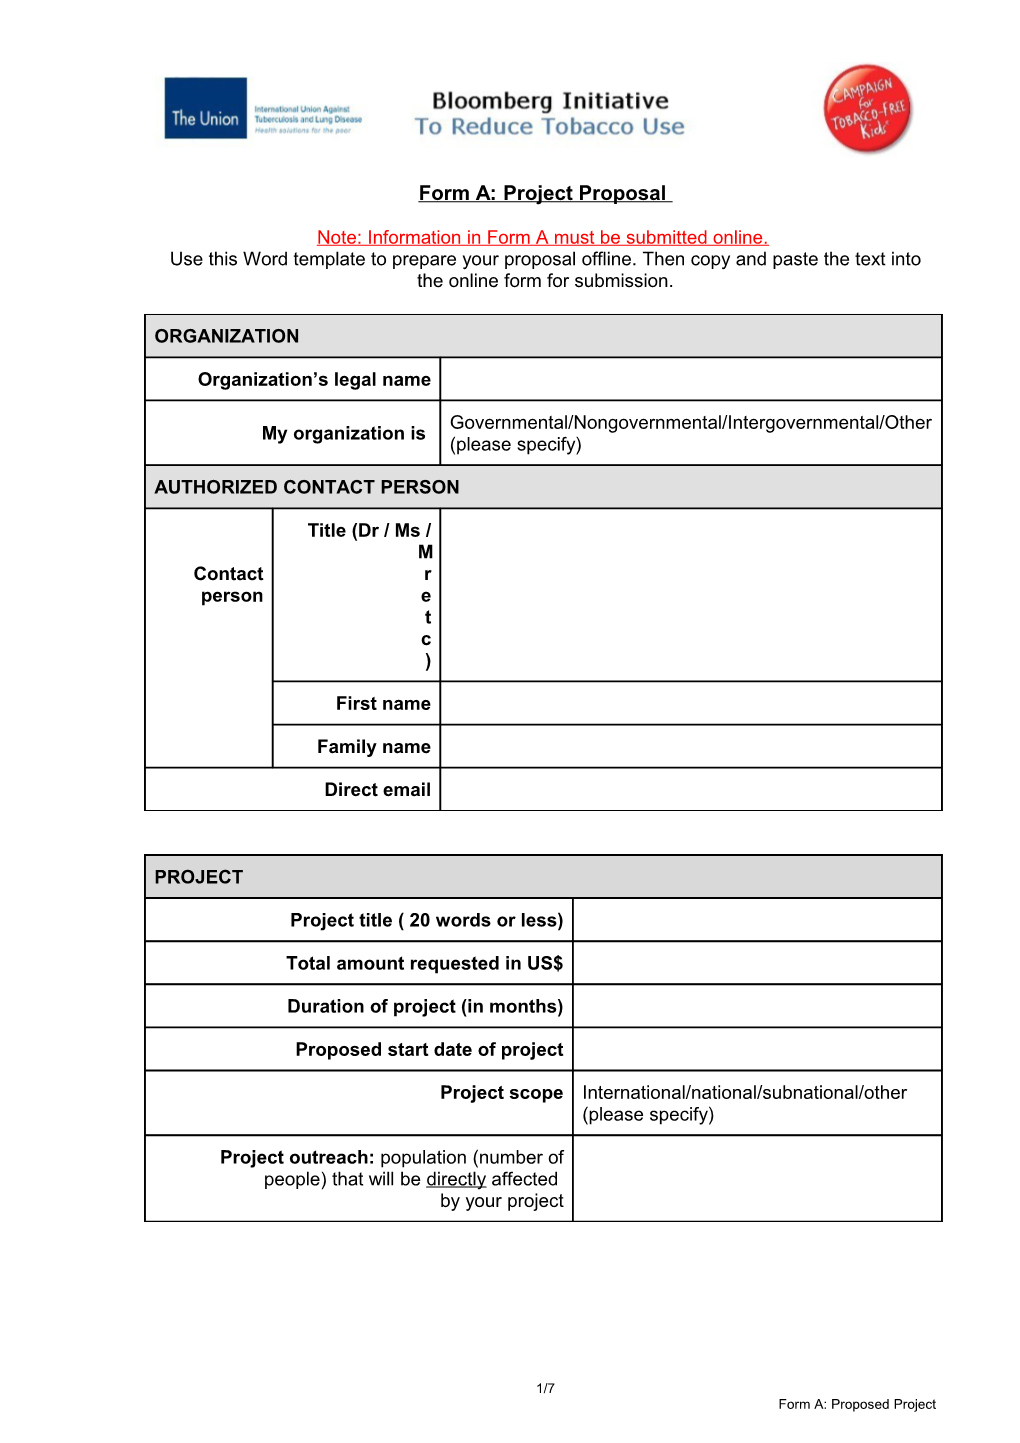 Form A: Project Proposal